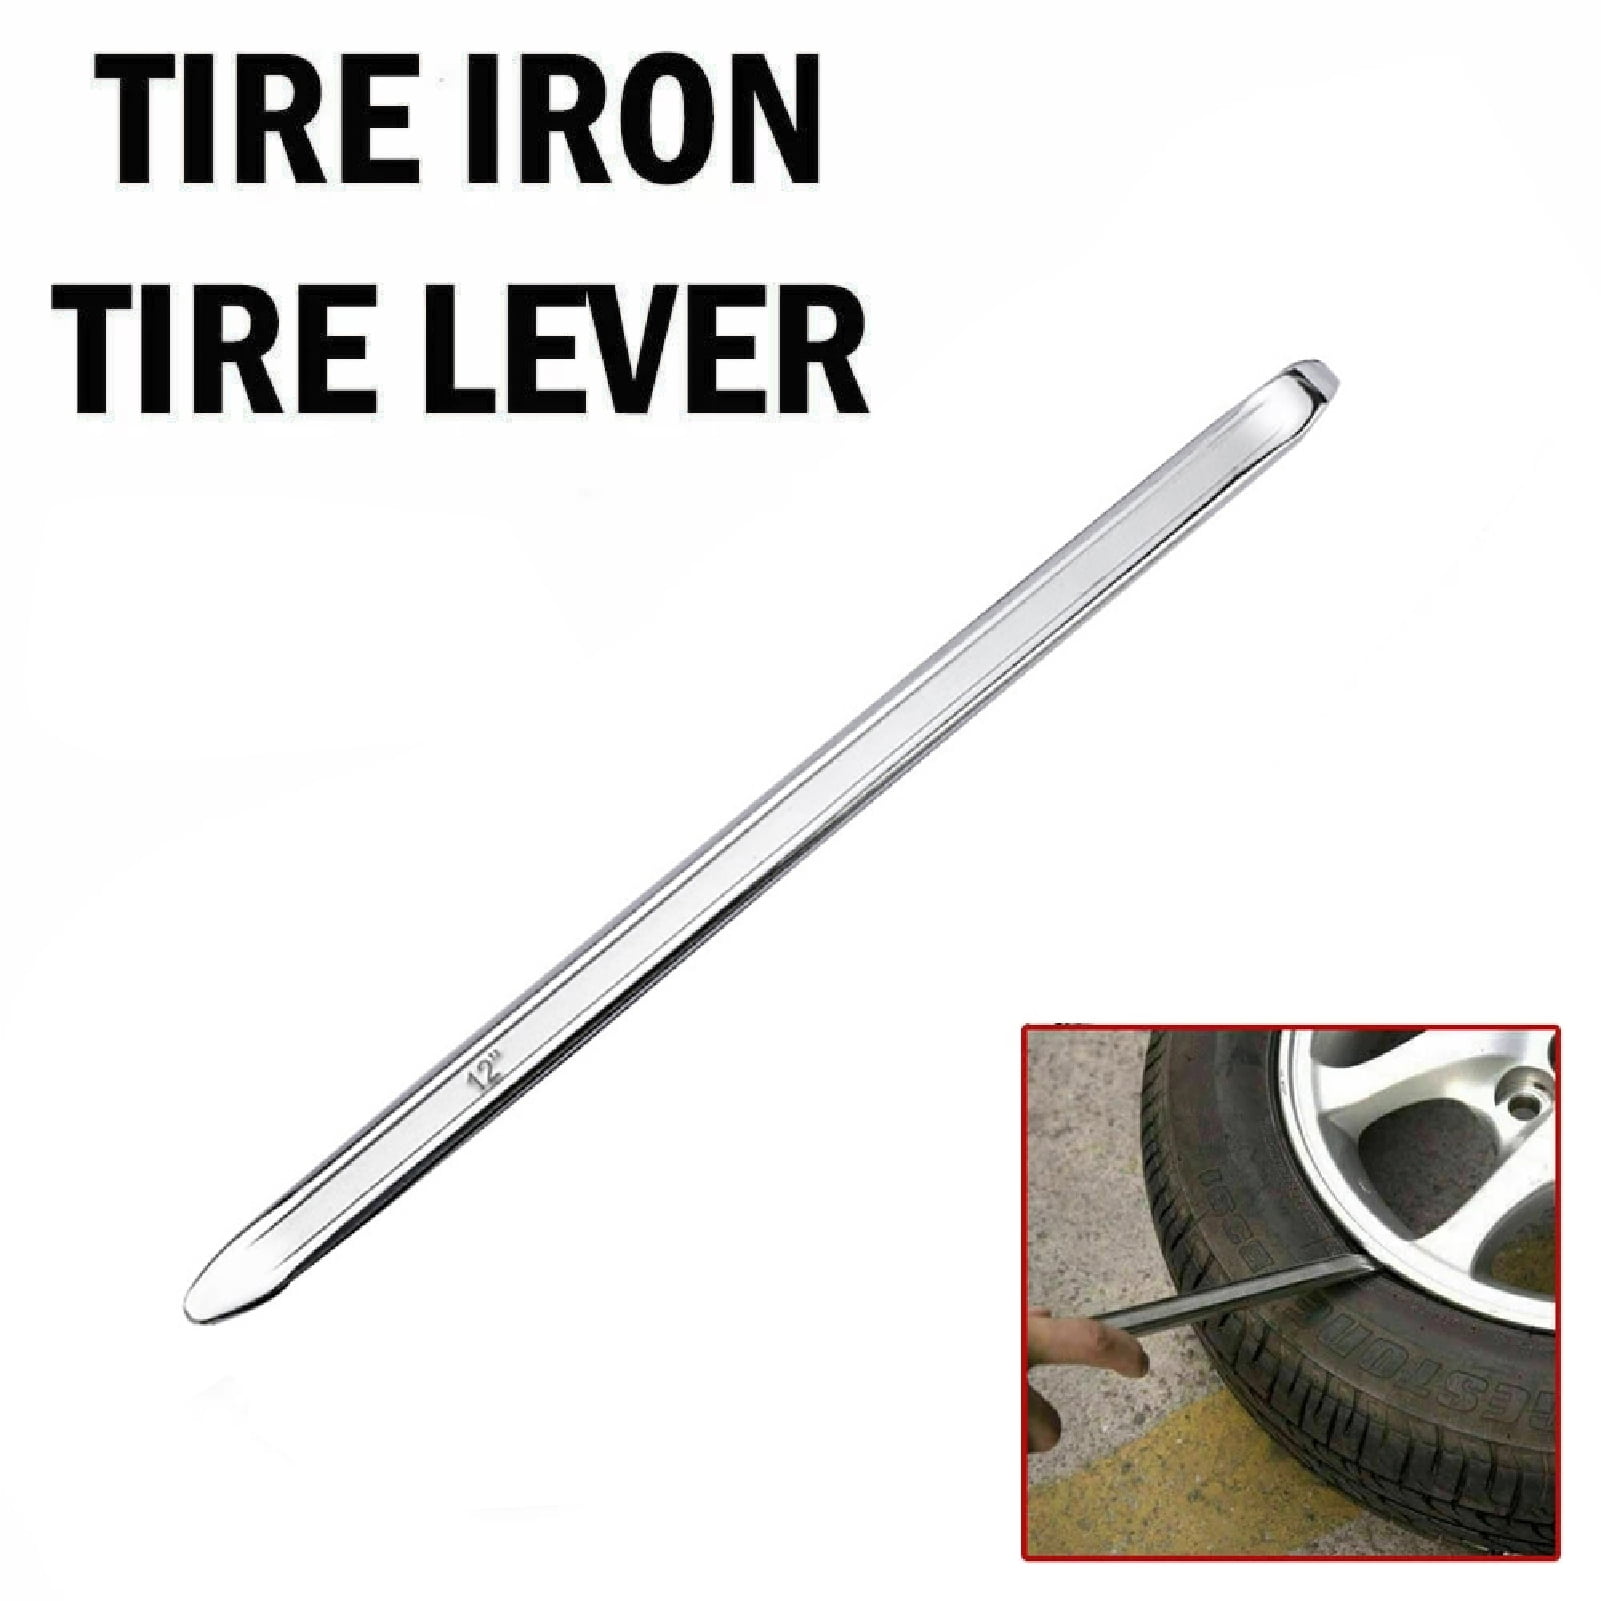 2 TWO FORGED STEEL CURVED 24" TIRE IRON PRY BAR AUTO CAR MOTORCYCLE BIKE CHANGE 